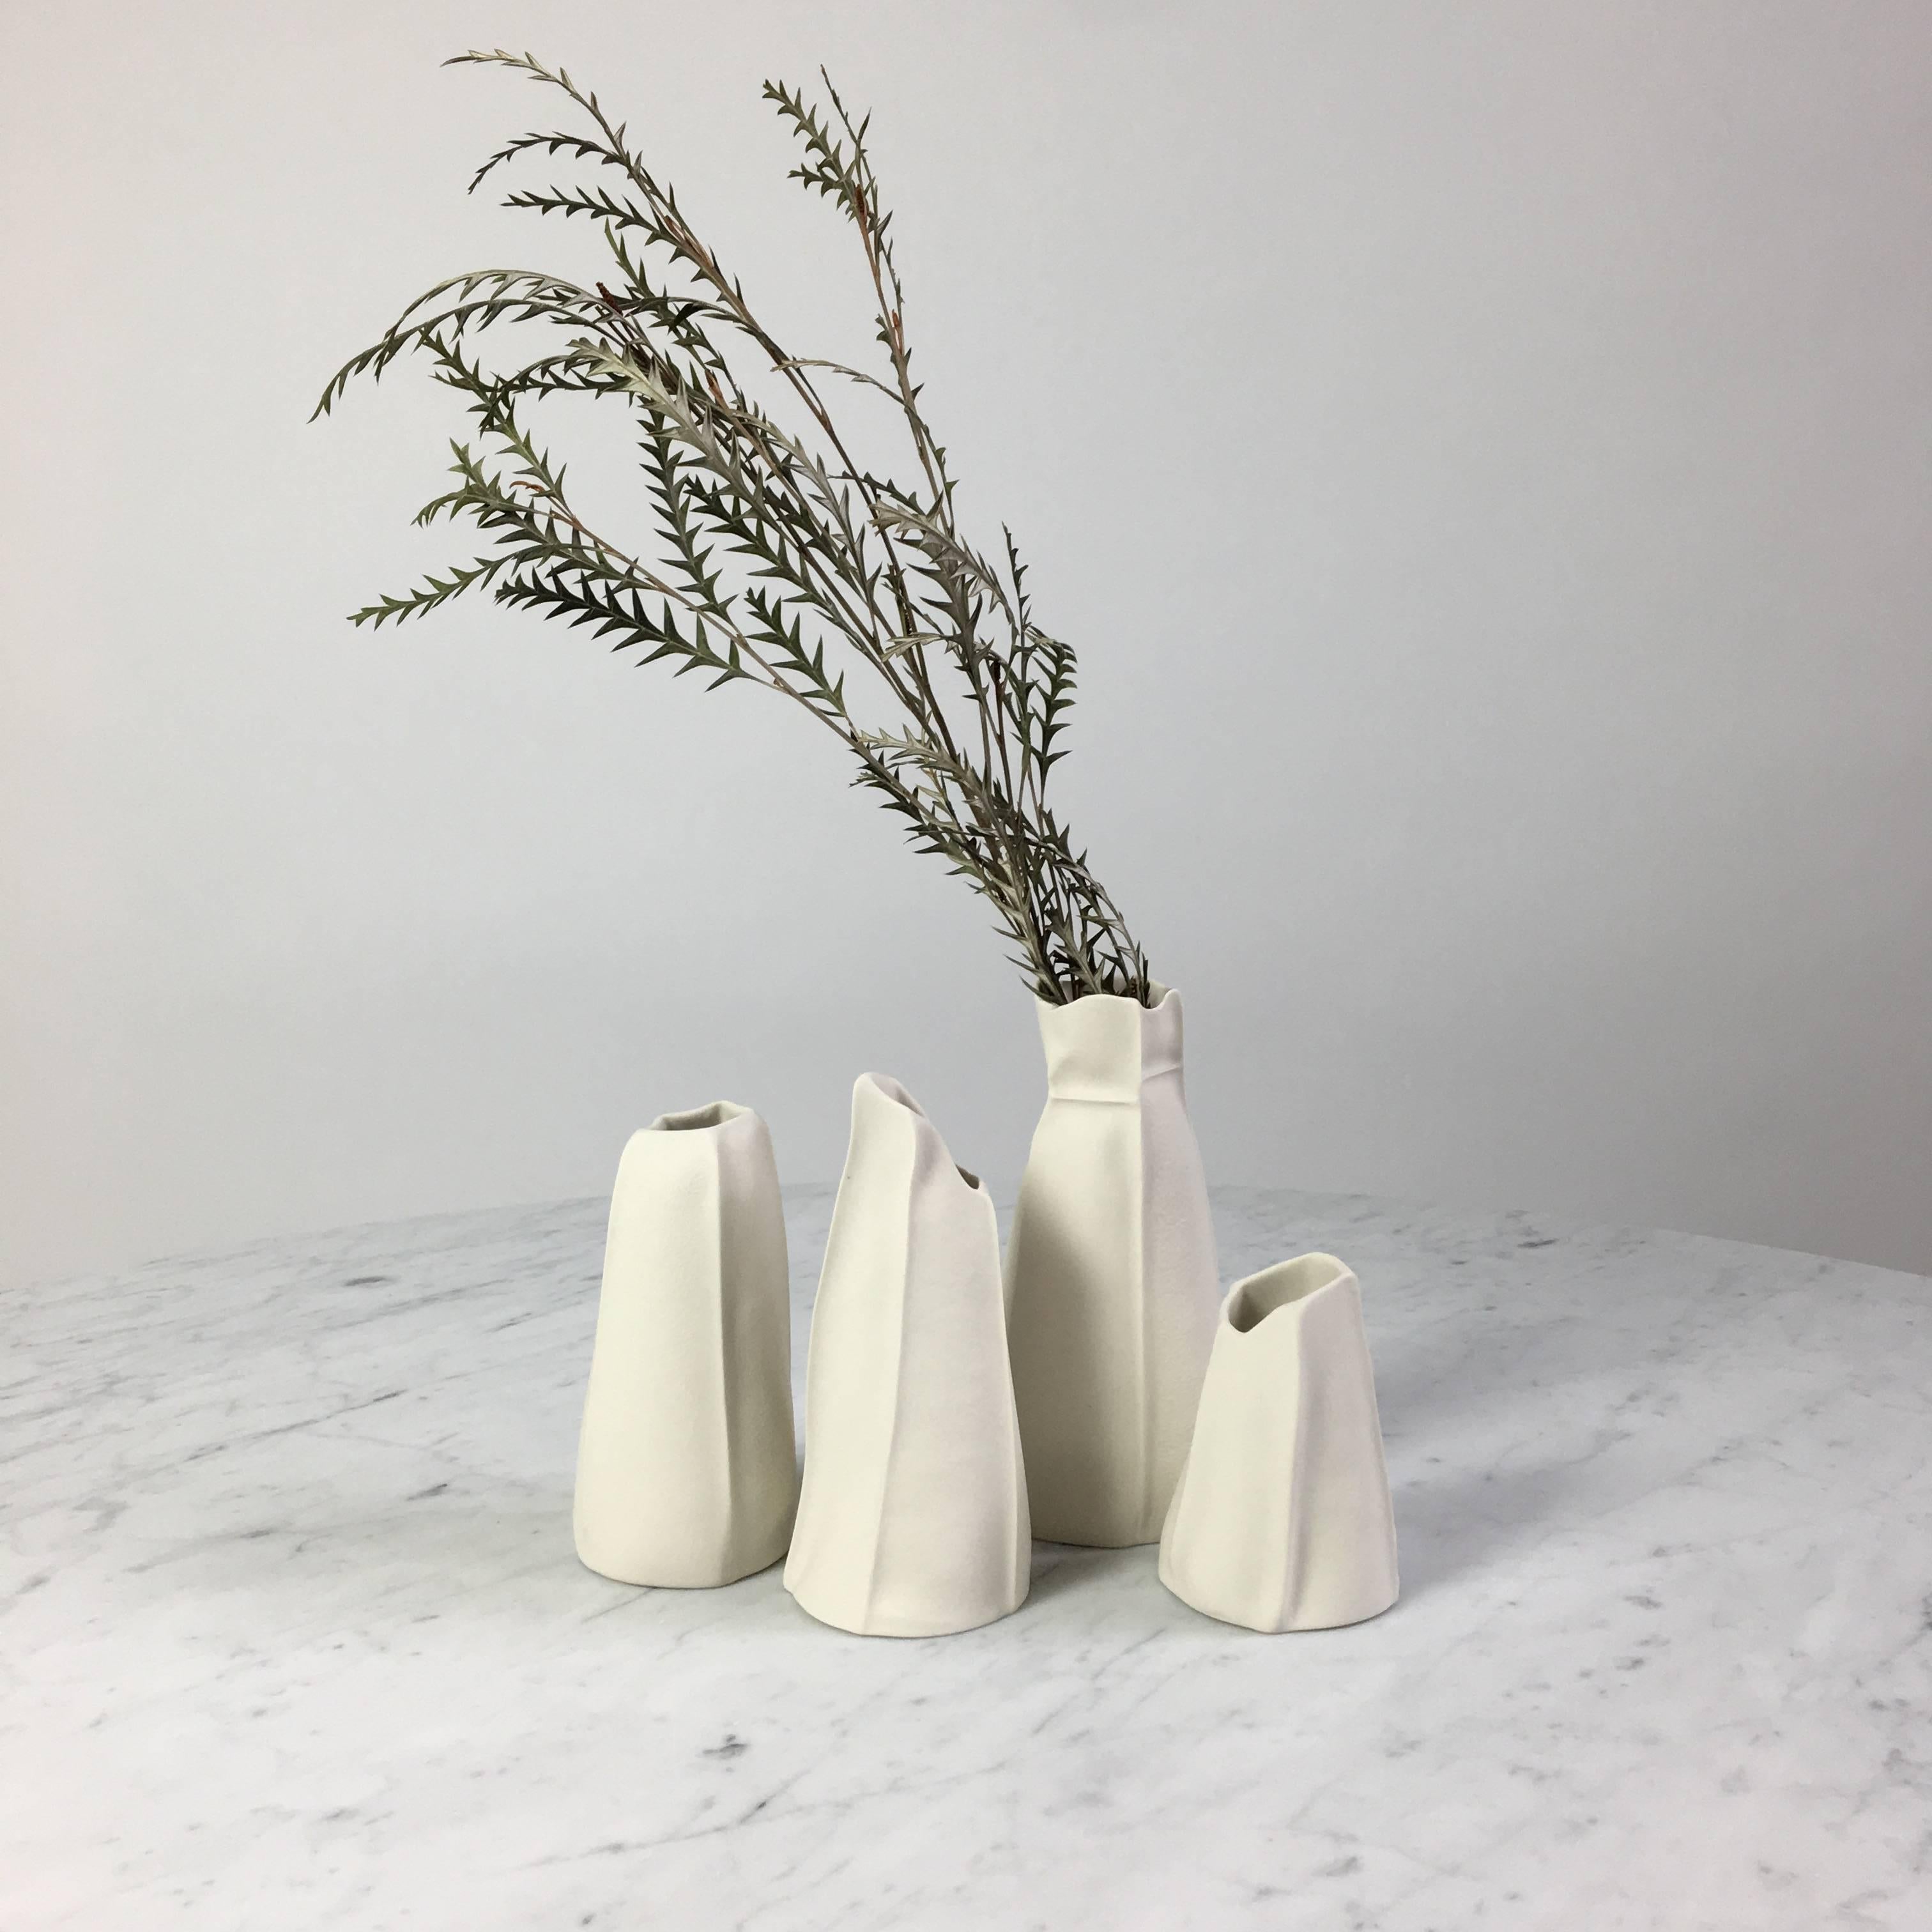 This listing is for a set of four unusual vases from the Kawa Porcelain series designed/made by Souda's Co-Owner, Luft Tanaka. Each piece has been made by casting liquid porcelain into a molds made entirely of leather. This highly-unique casting